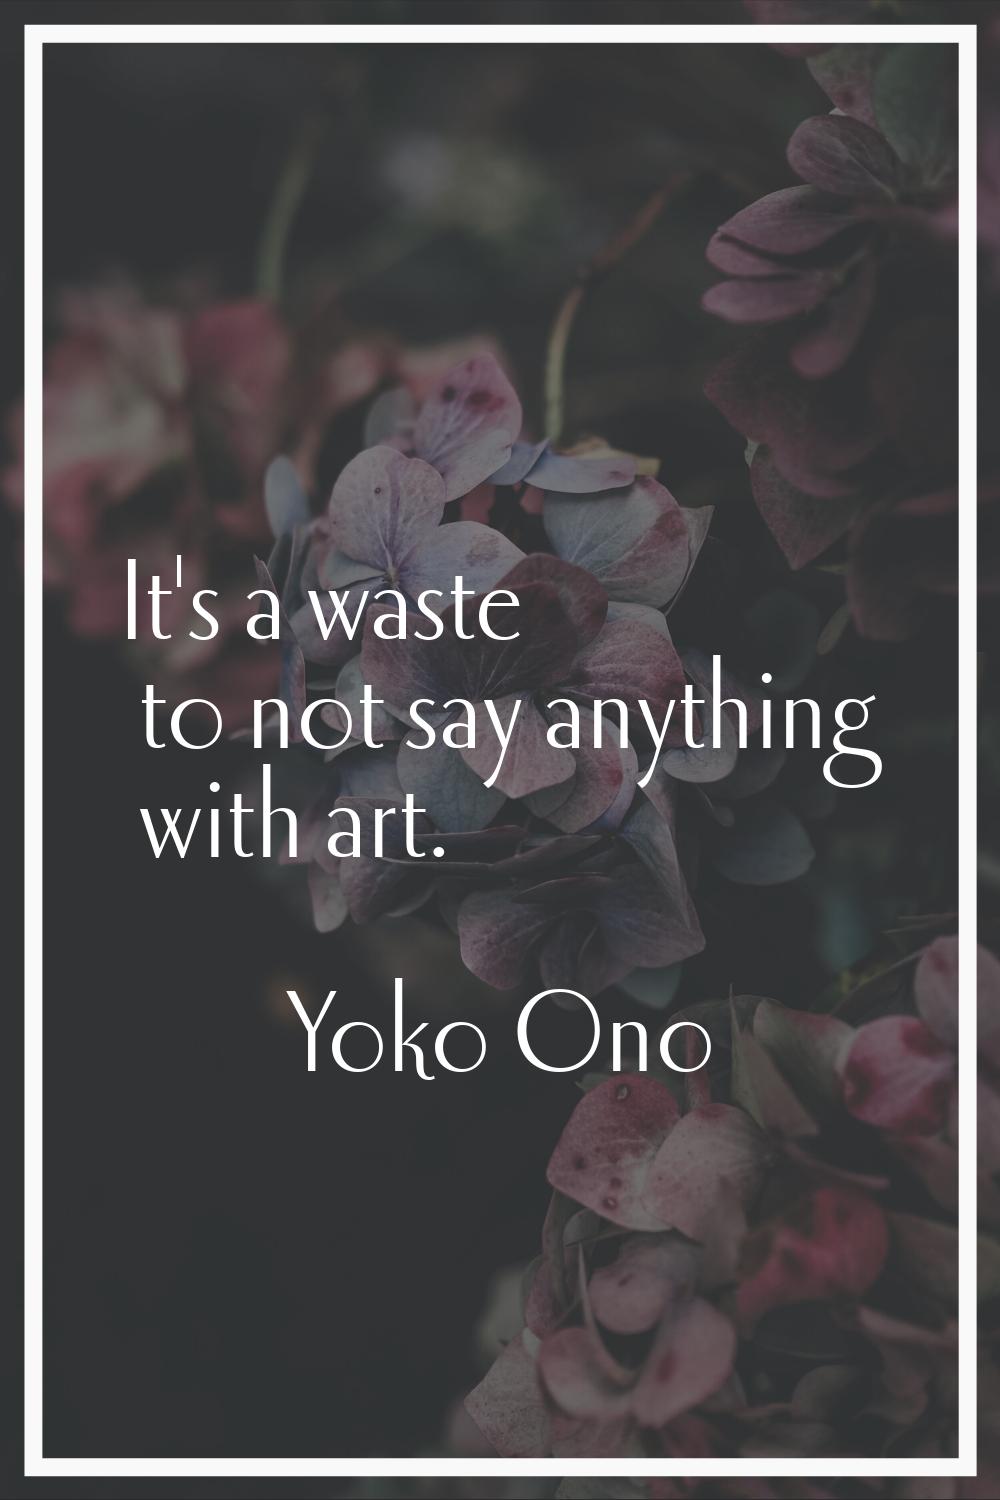 It's a waste to not say anything with art.